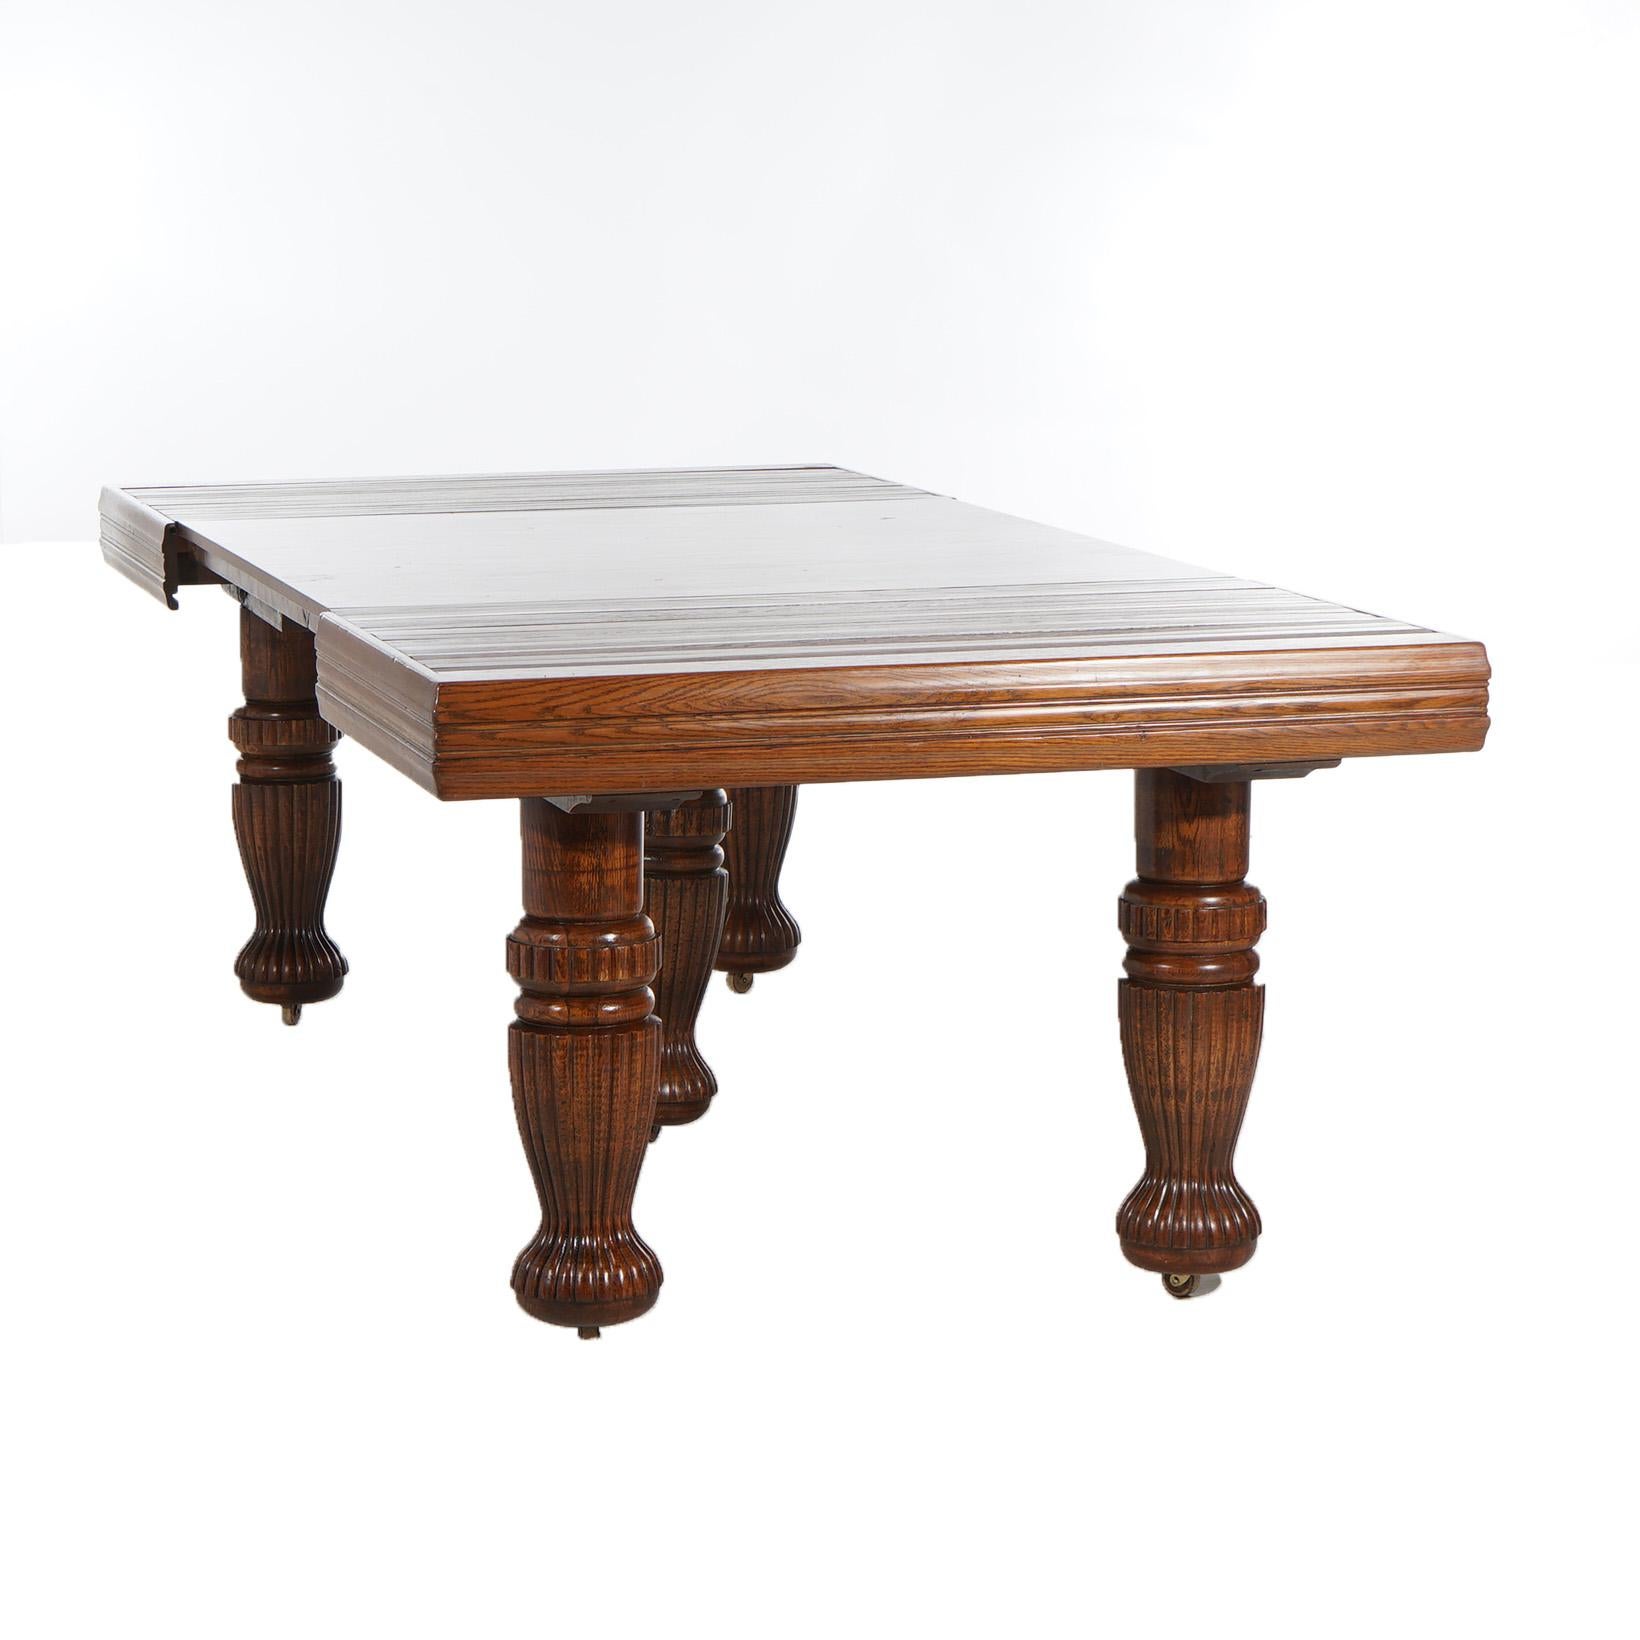 Antique Square Carved Oak Folding Extension Dining Table C1900 In Good Condition For Sale In Big Flats, NY